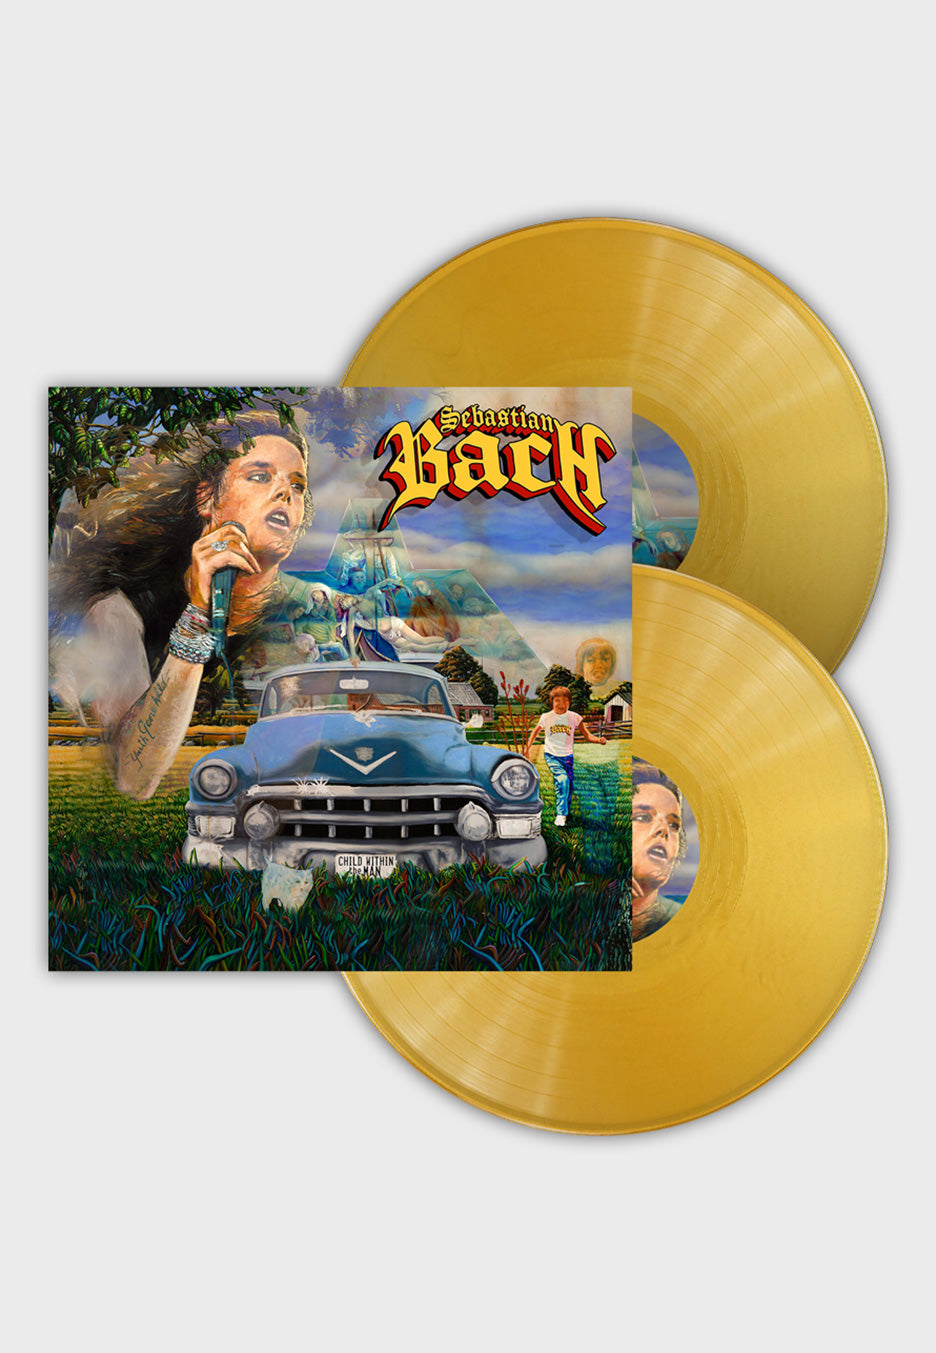 Sebastian Bach - Child Within The Man Gold Ltd. - Colored 2 Vinyl | Neutral-Image